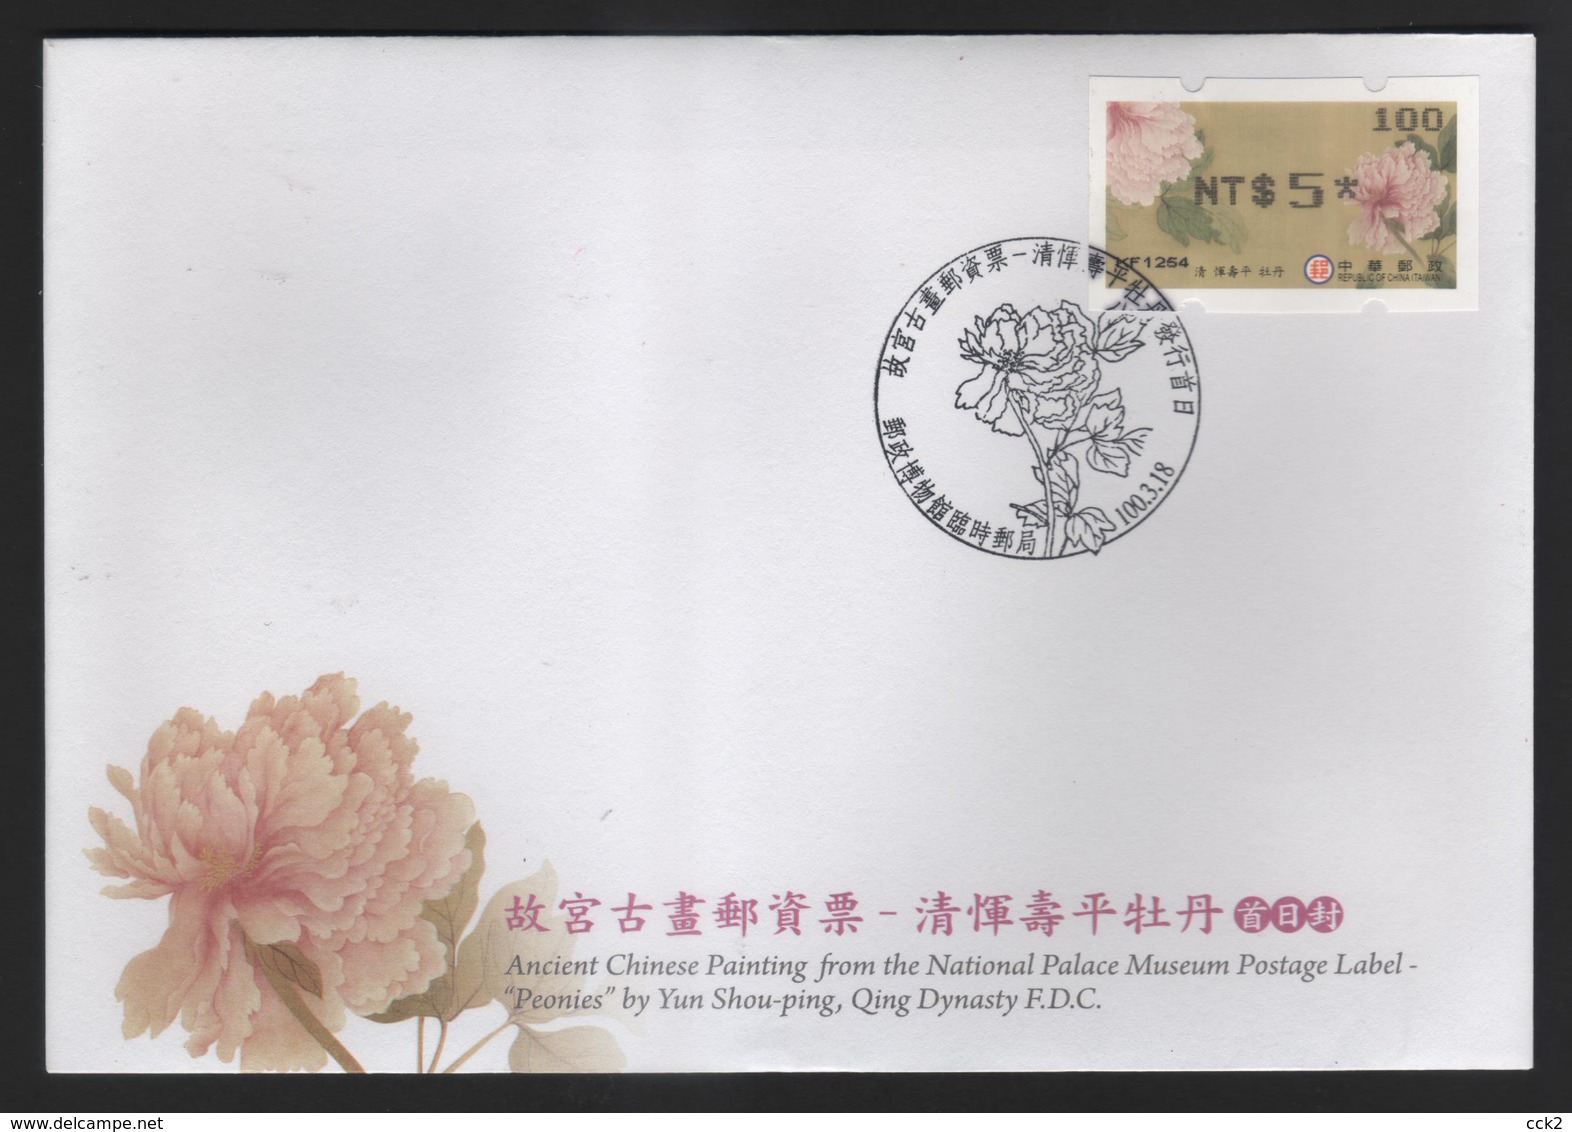 2011 Taiwan(Formosa)- FDC- Peonies Postage Label #100 - Covers & Documents